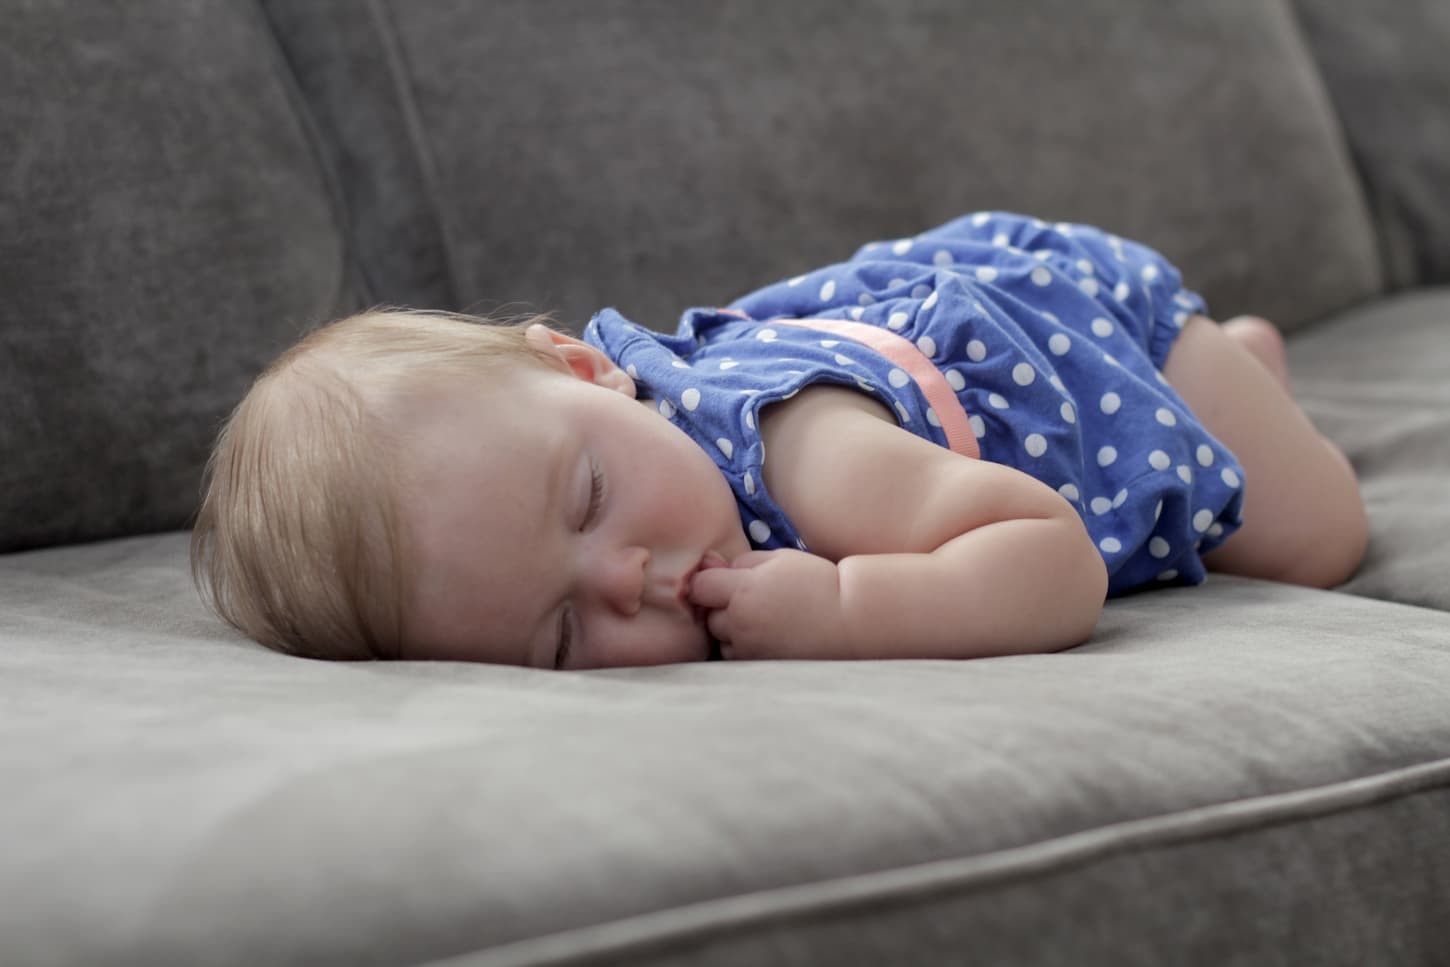 An image of a sleeping baby on a couch aging about 4 months old